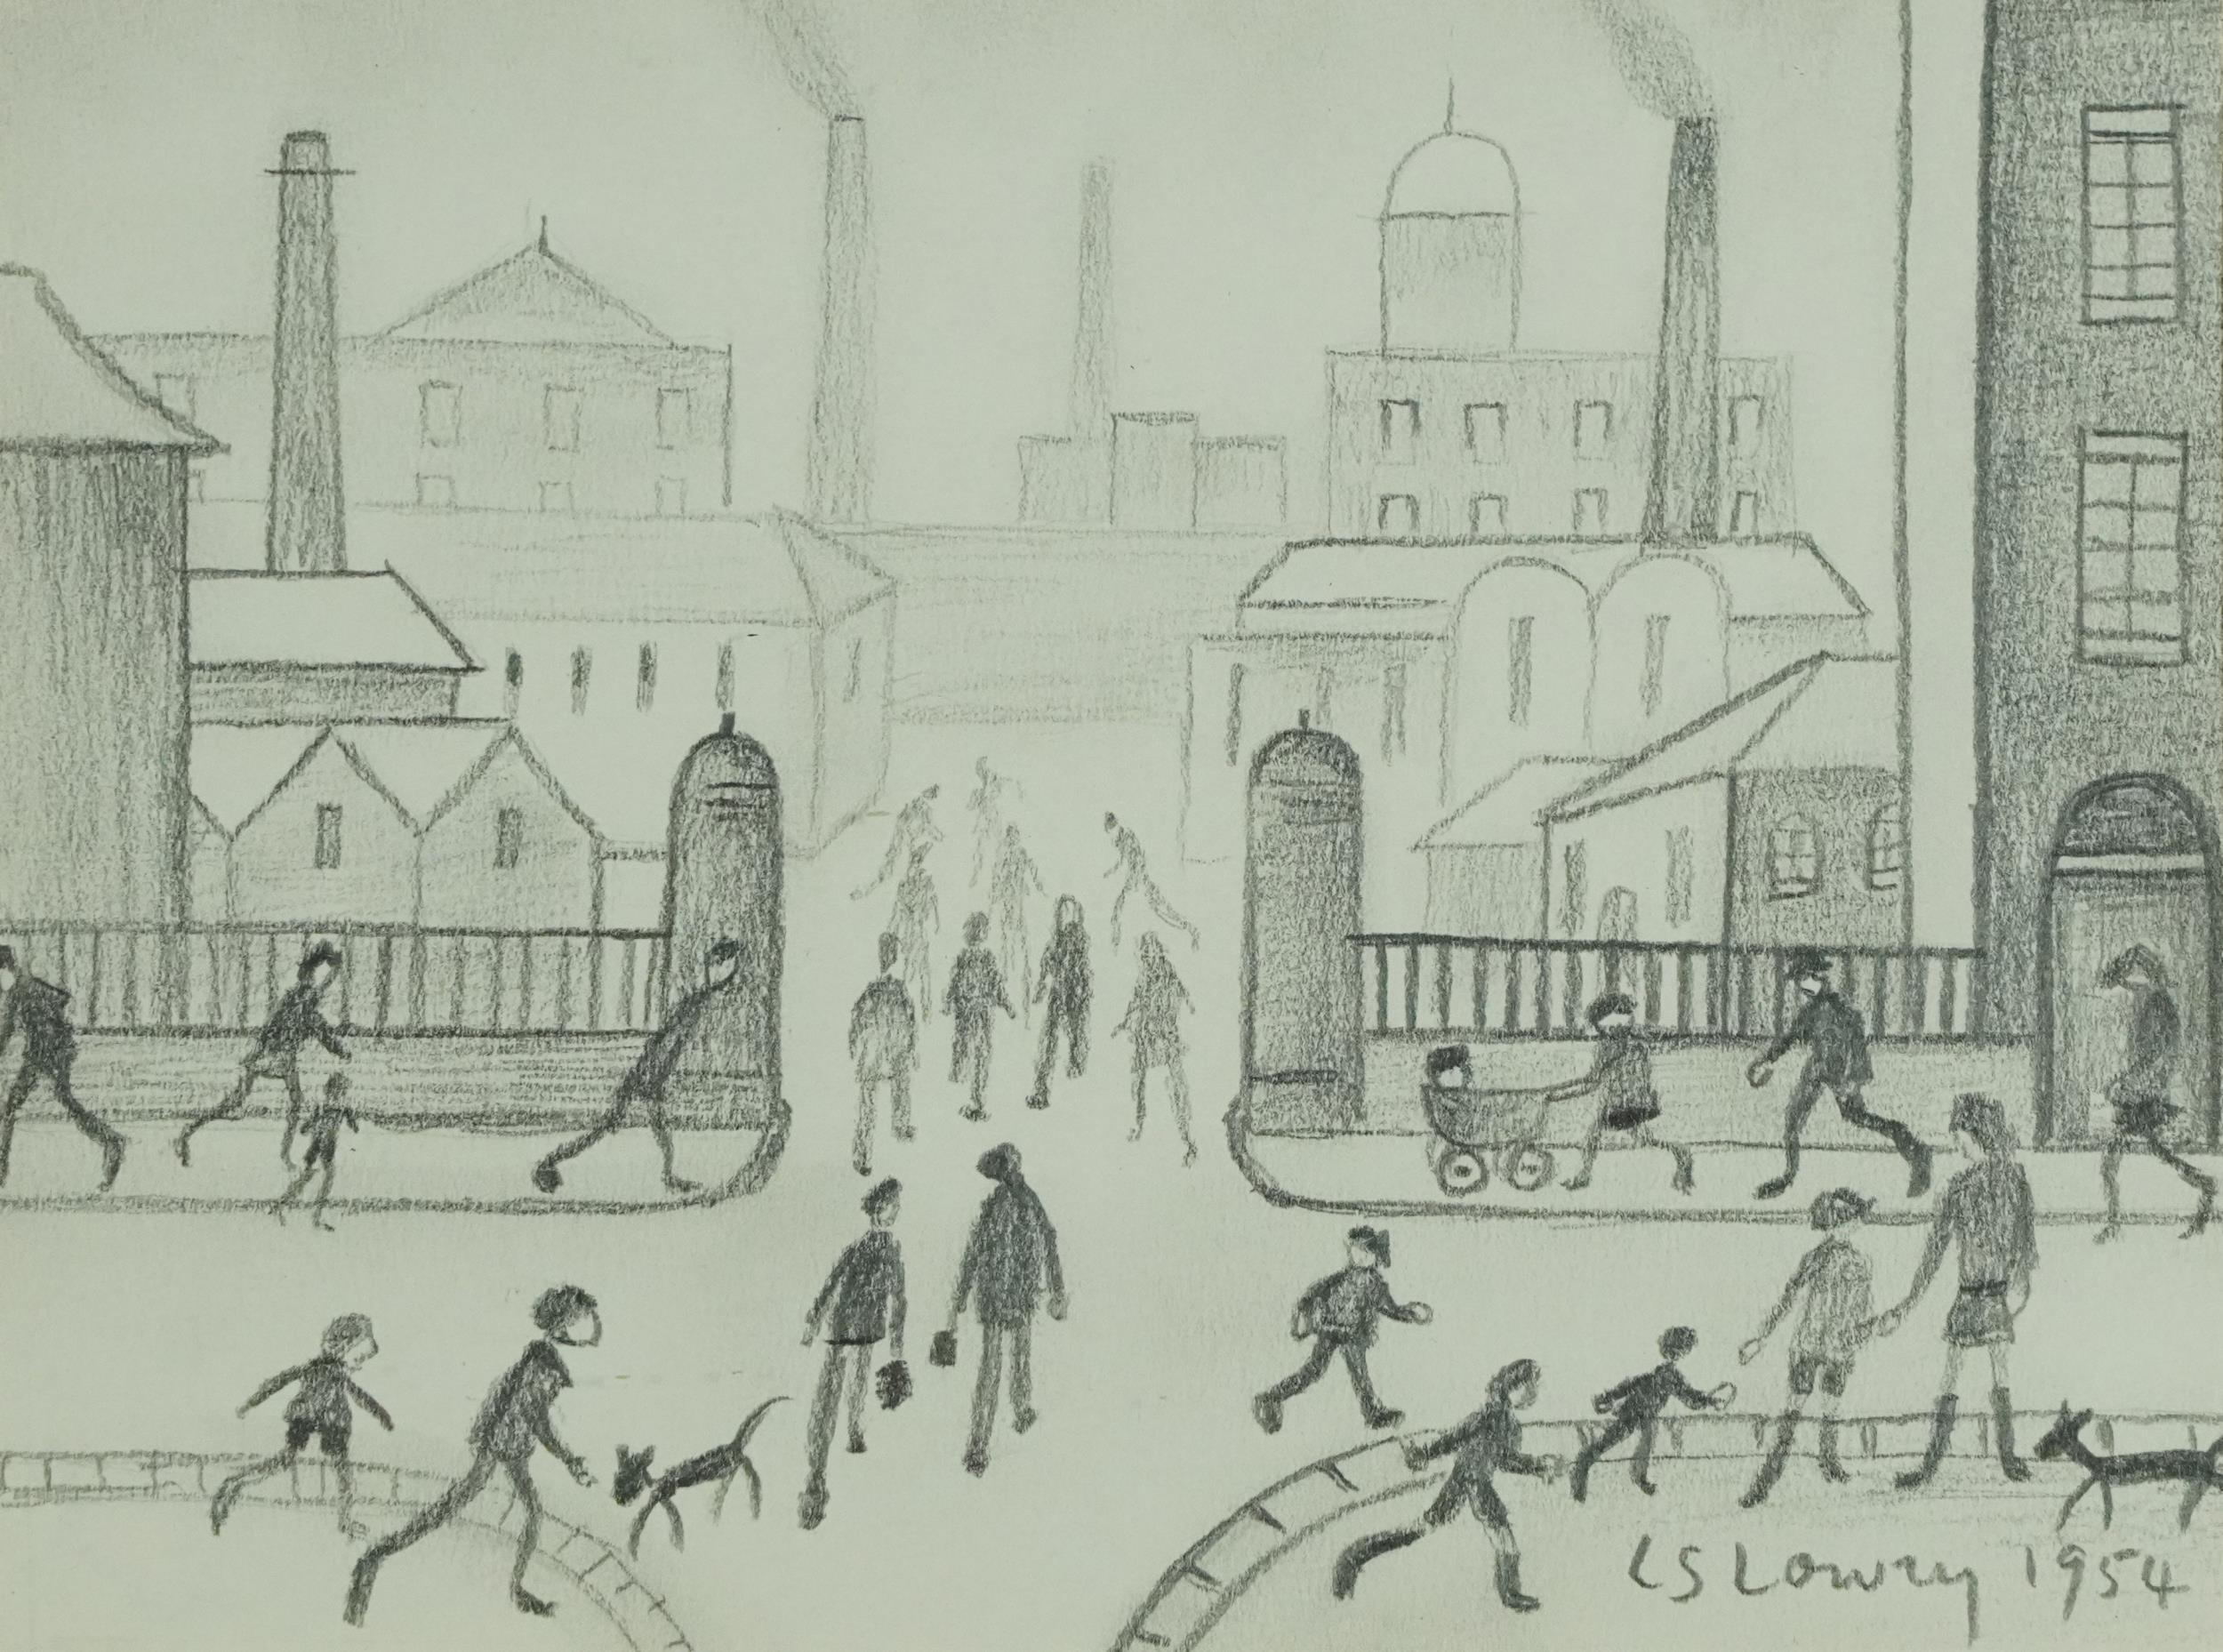 Manner of Laurence Stephen Lowry - Industrial street scene with figures walking about, pencil sketch